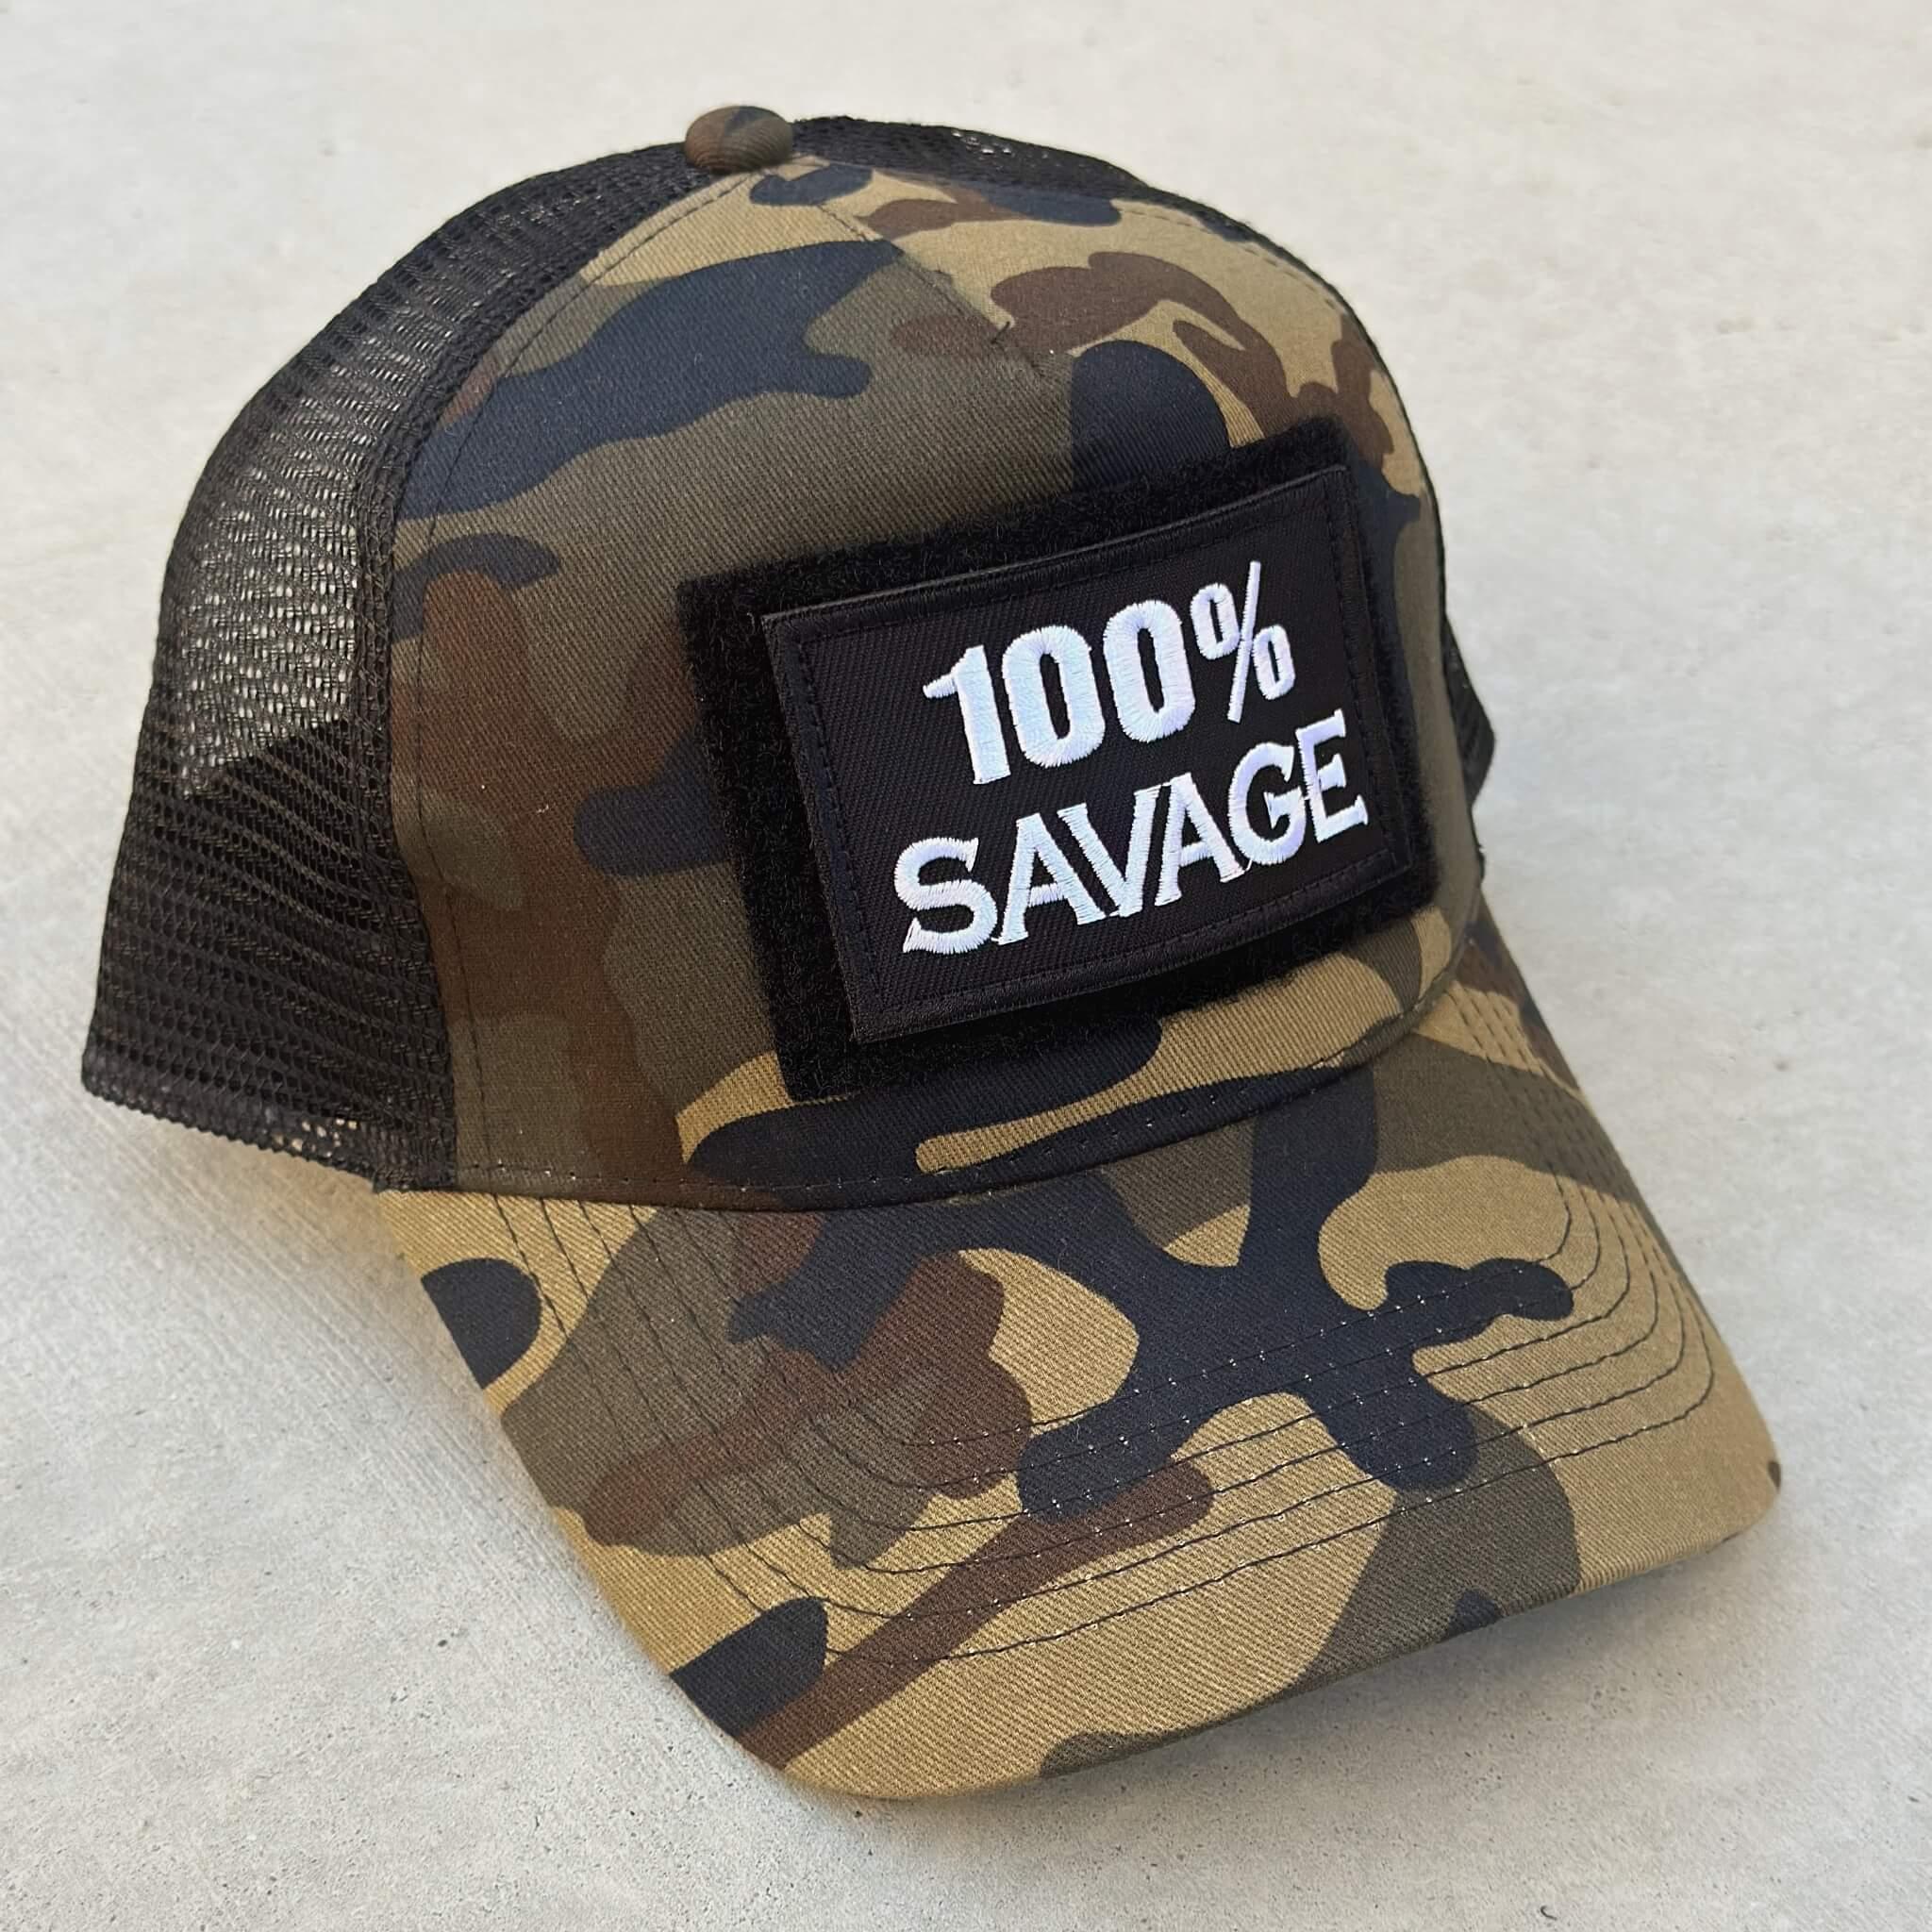 The trucker snapback cap in camo colors with 100% Savage patch attached